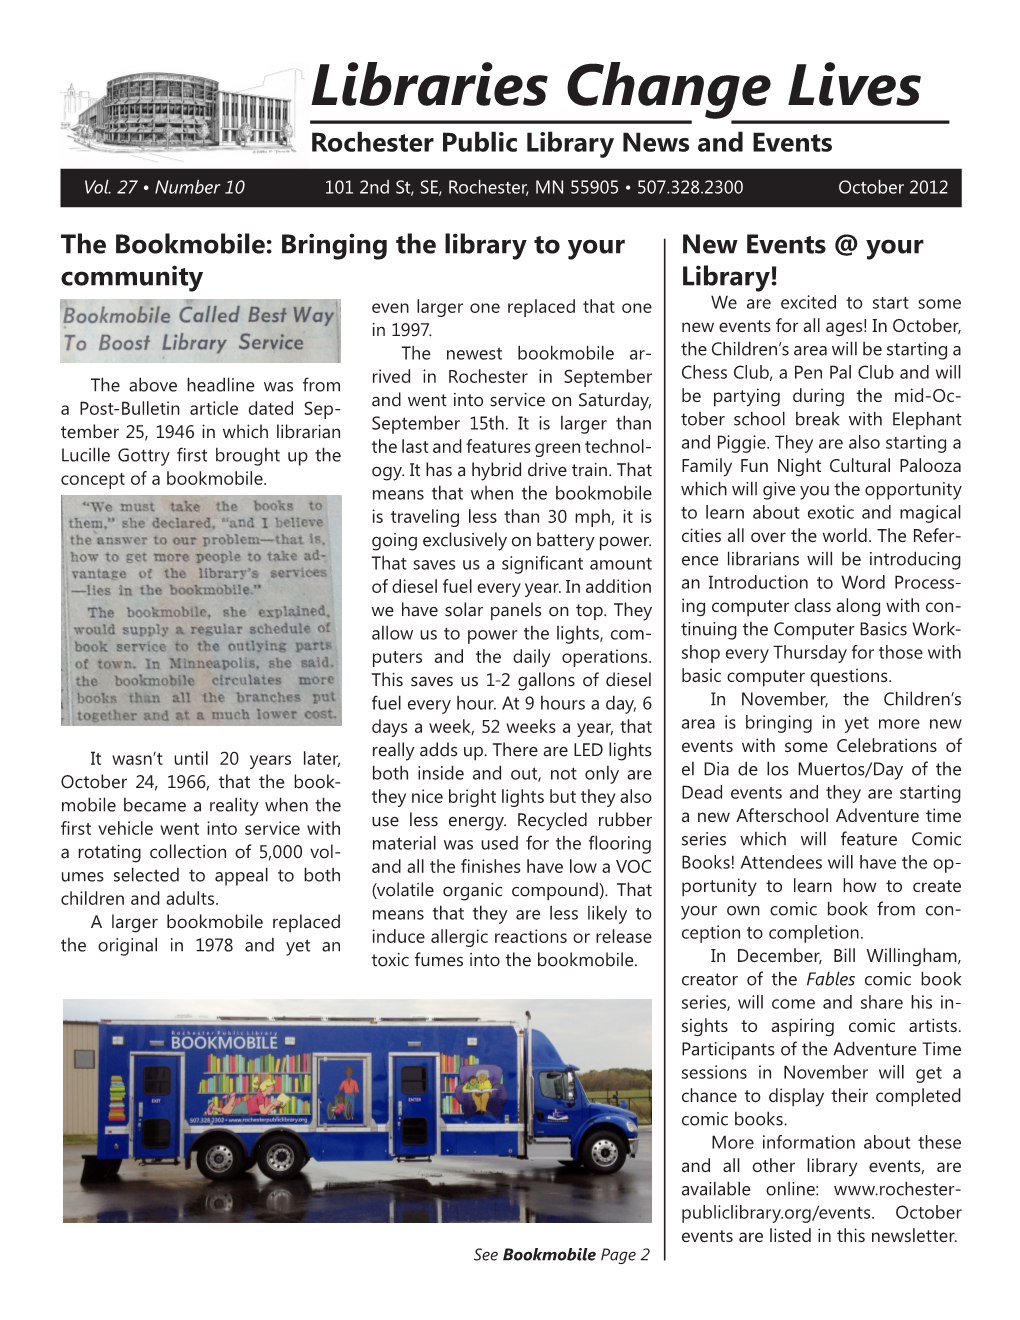 Bookmobile: Bringing the Library to Your New Events @ Your Community Library! Even Larger One Replaced That One We Are Excited to Start Some in 1997